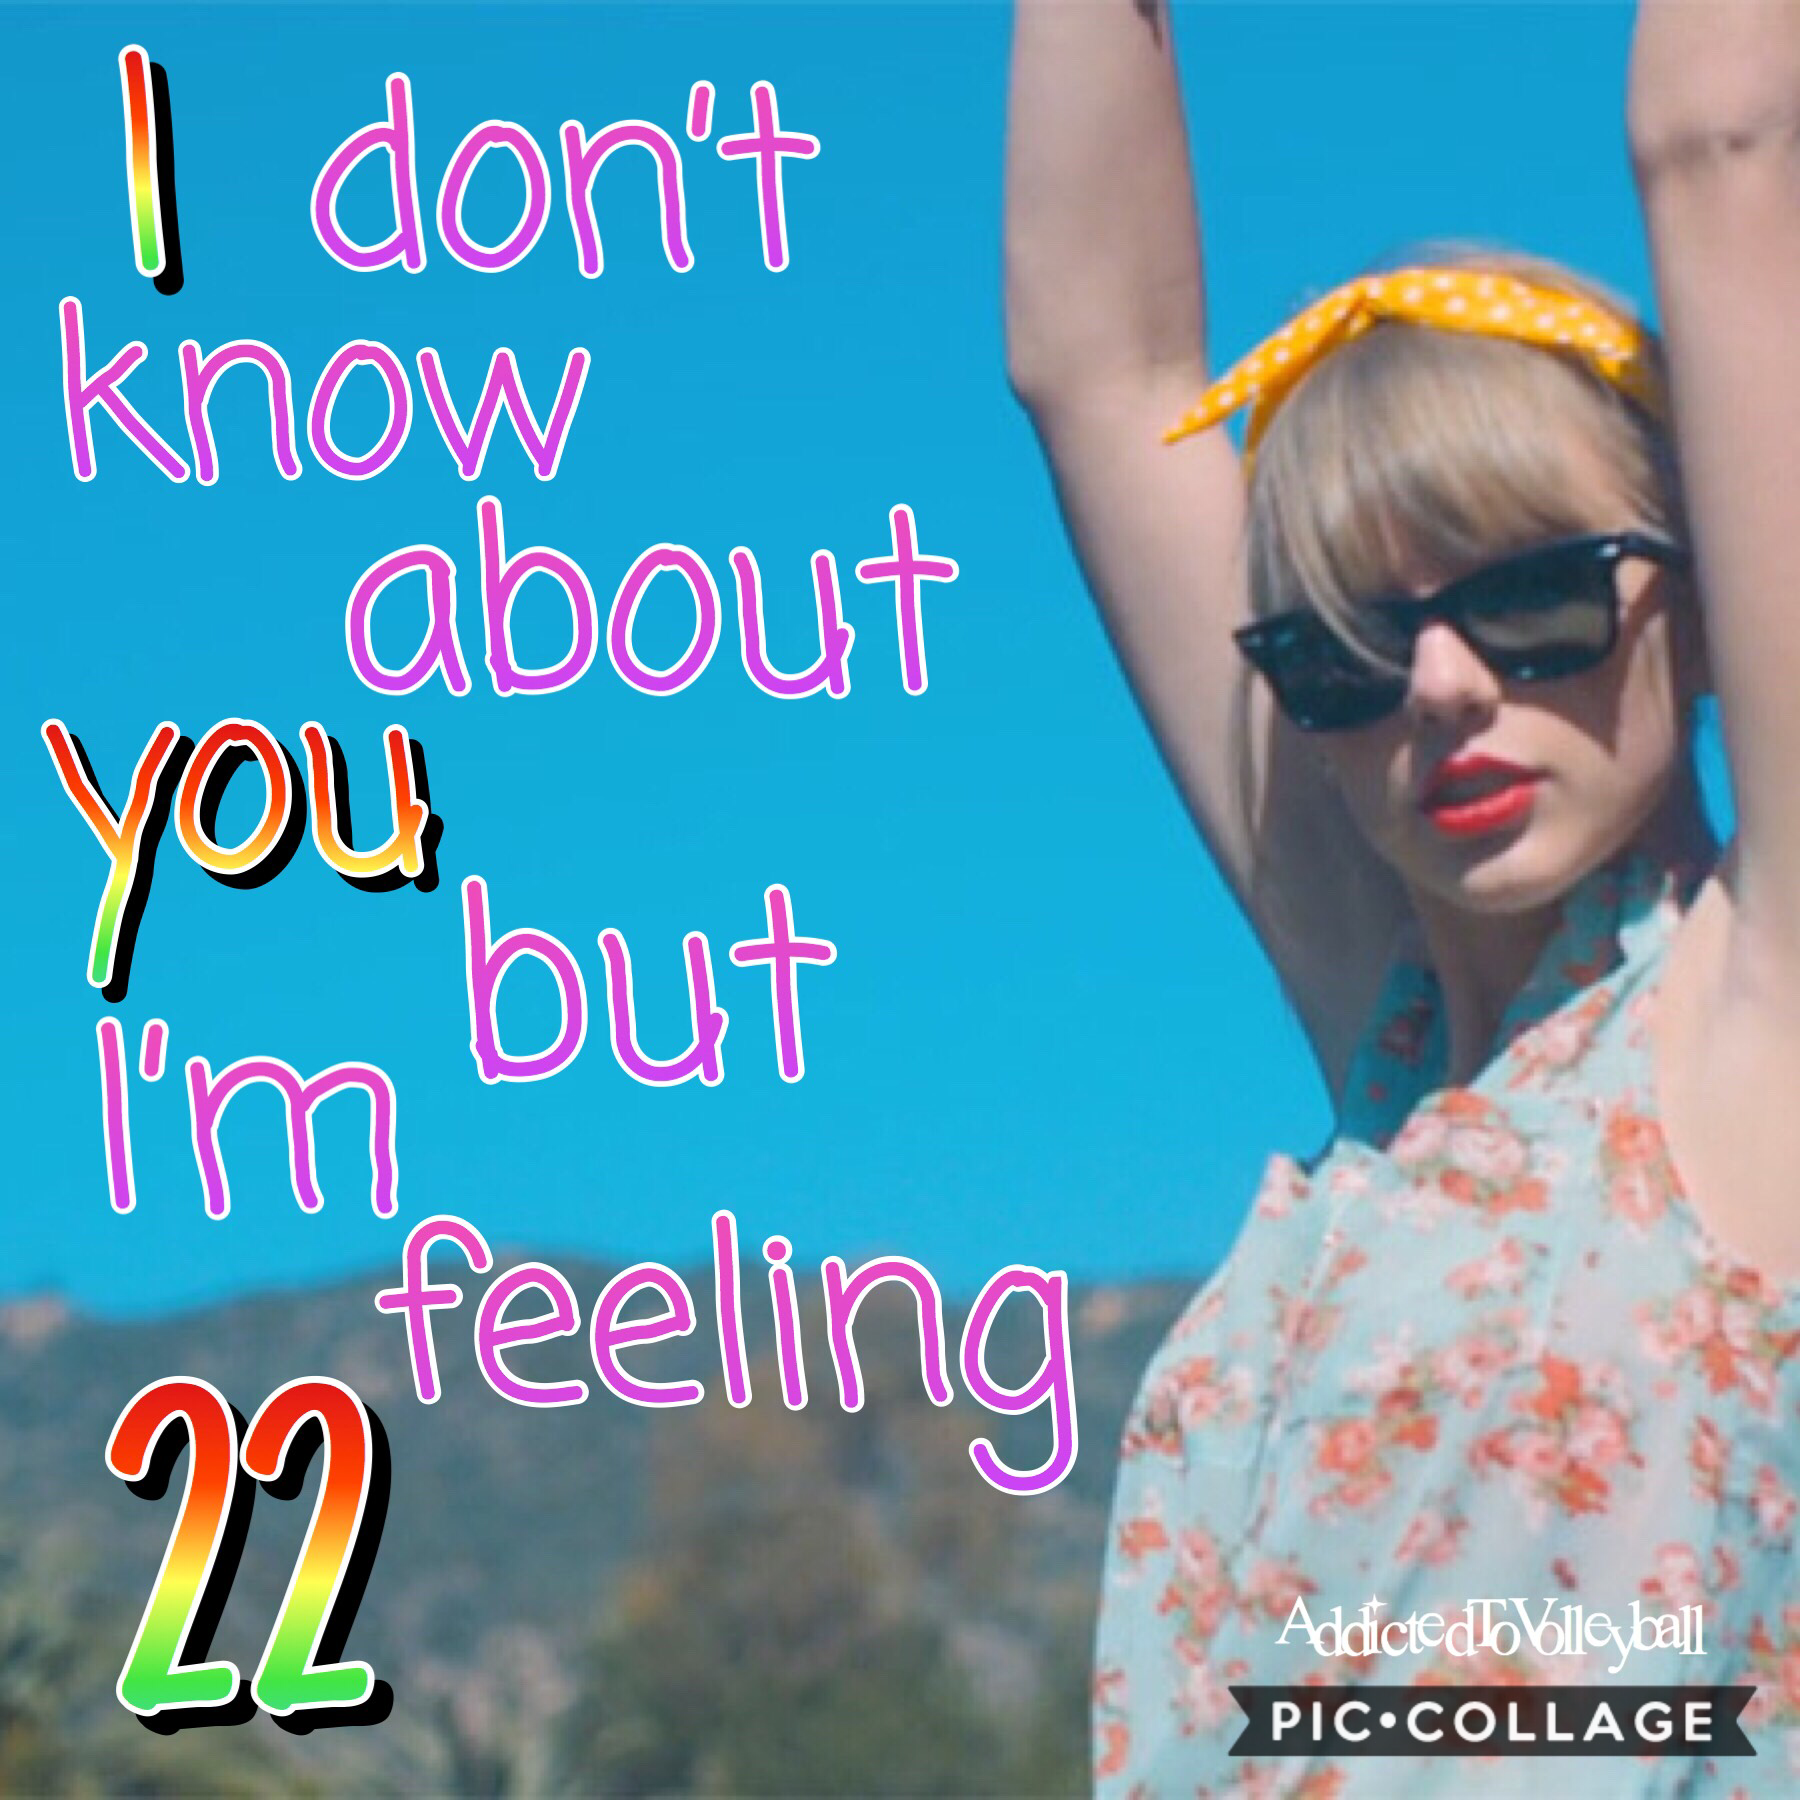 amazing news + new taylor edit 
I’m seeing Taylor on tour !! I’m so excited 😆🤗
This is “22” by T Swizzle 😝
Happy Birthday to Ariana Grande !!
Rate /10 ❣️
QOTD: have you ever seen Taylor in concert ?
AOTD: nope, this will be my first time ! 